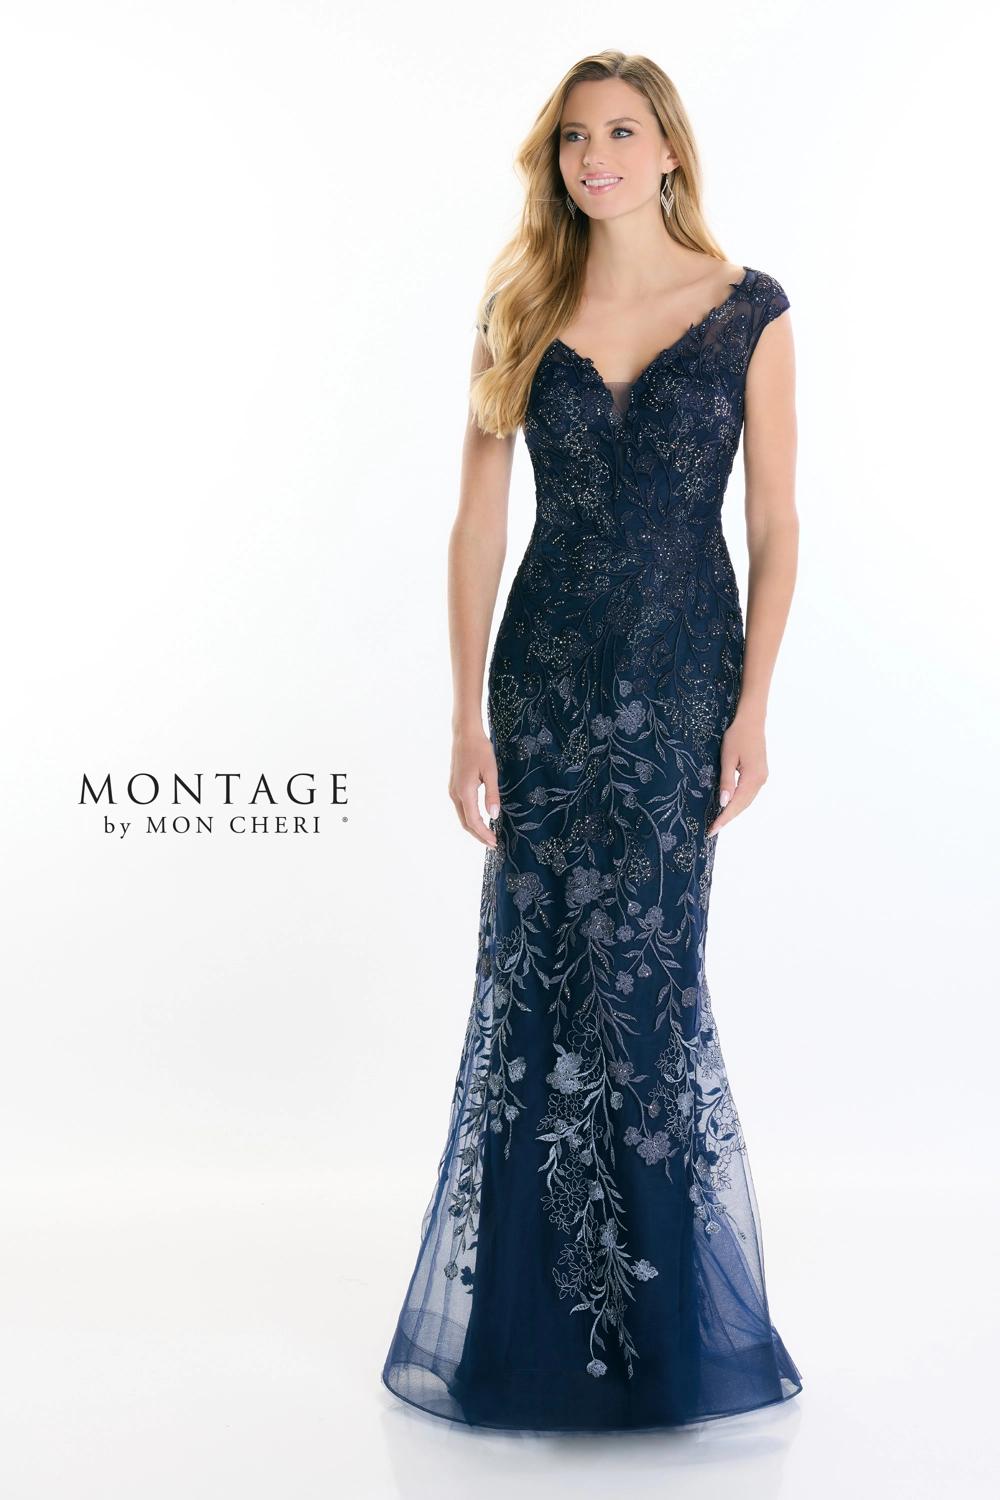 Mother of the Bride Dresses by Montage | Mon Cheri | Special Occasion  Formal Wear for the Modern Mother - M522 | Mon Cheri Bridals